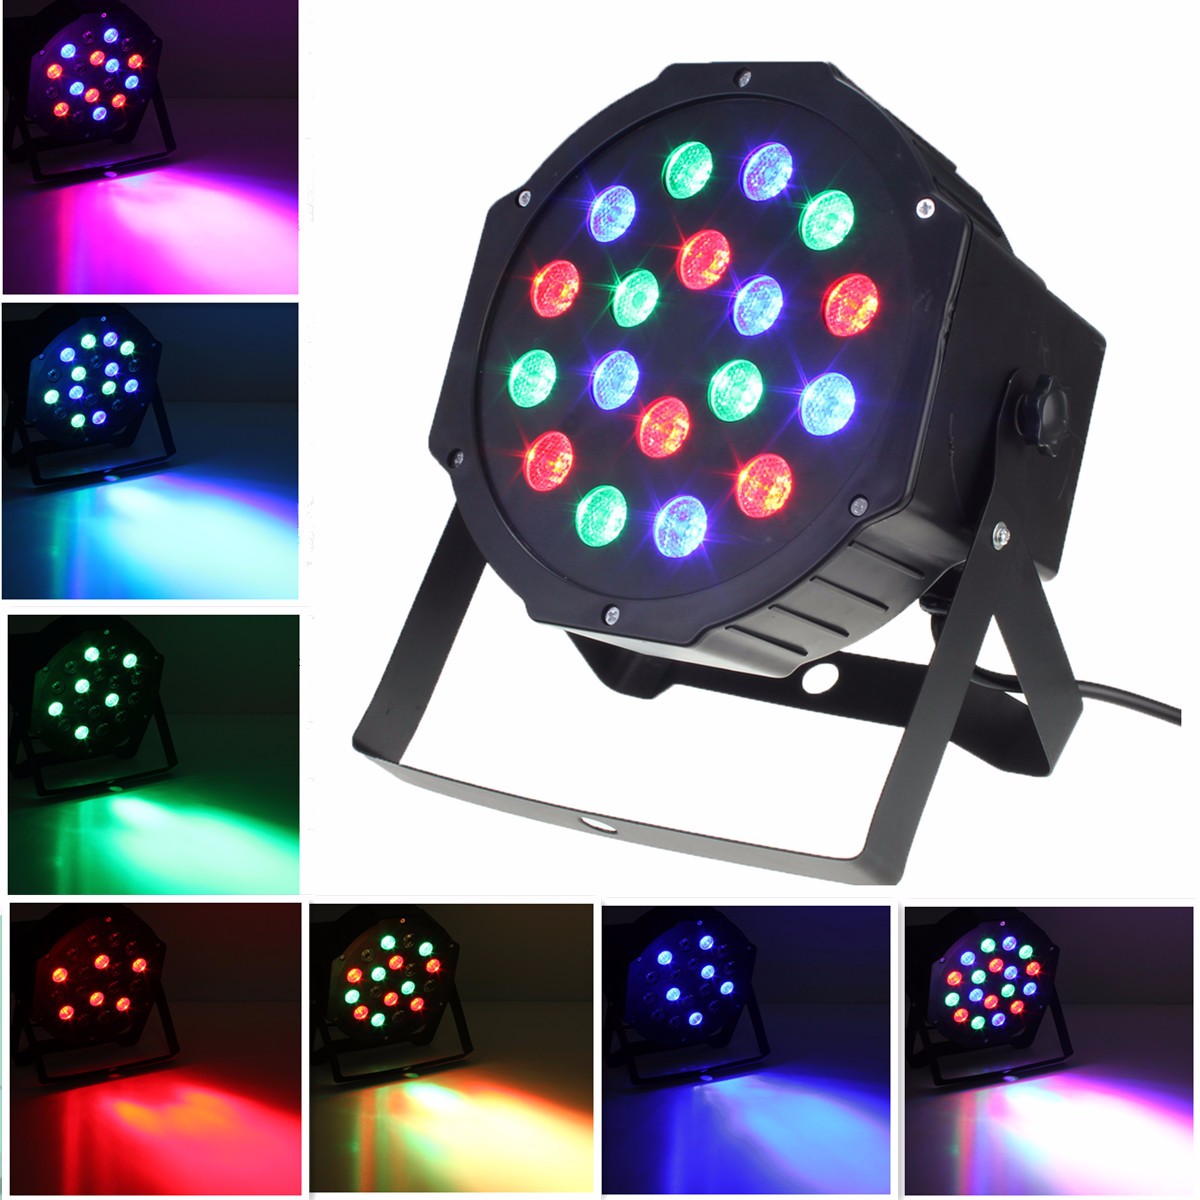 Find SOLMORE 18W DMX 512 RGB LED Par Stage Lighting Party DJ Disco KTV Christmas Projector Light AC110 220V for Sale on Gipsybee.com with cryptocurrencies